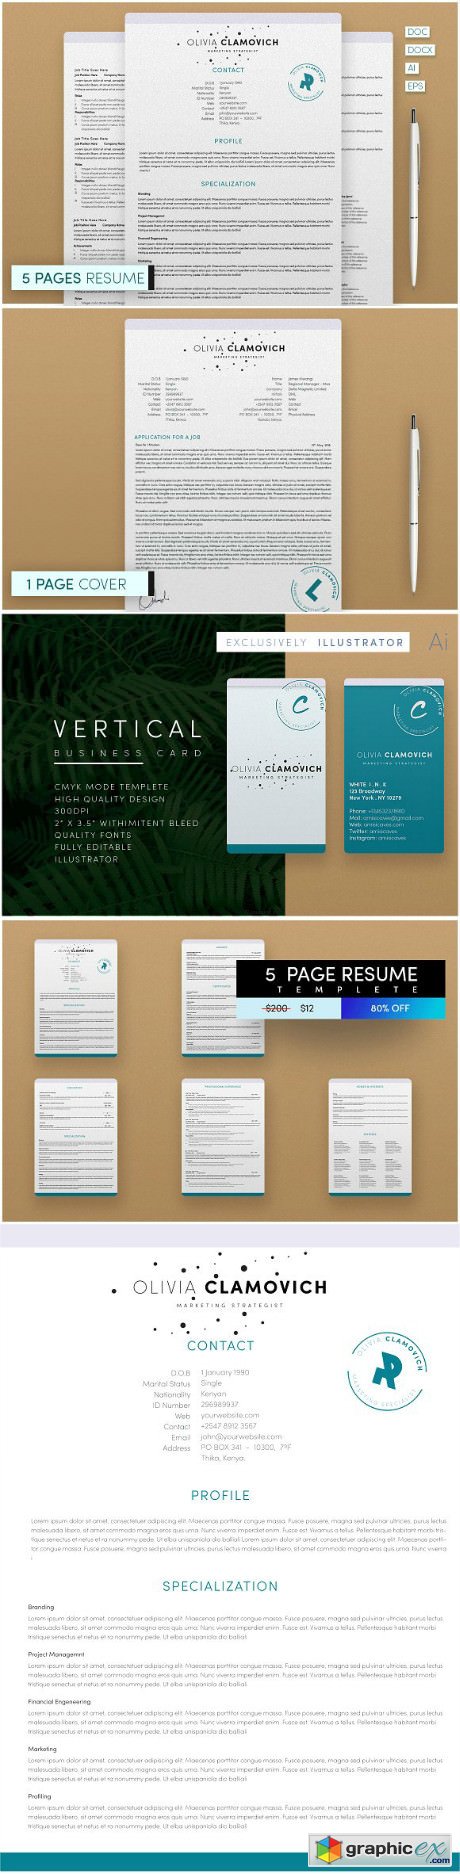 5 Page Resume Template